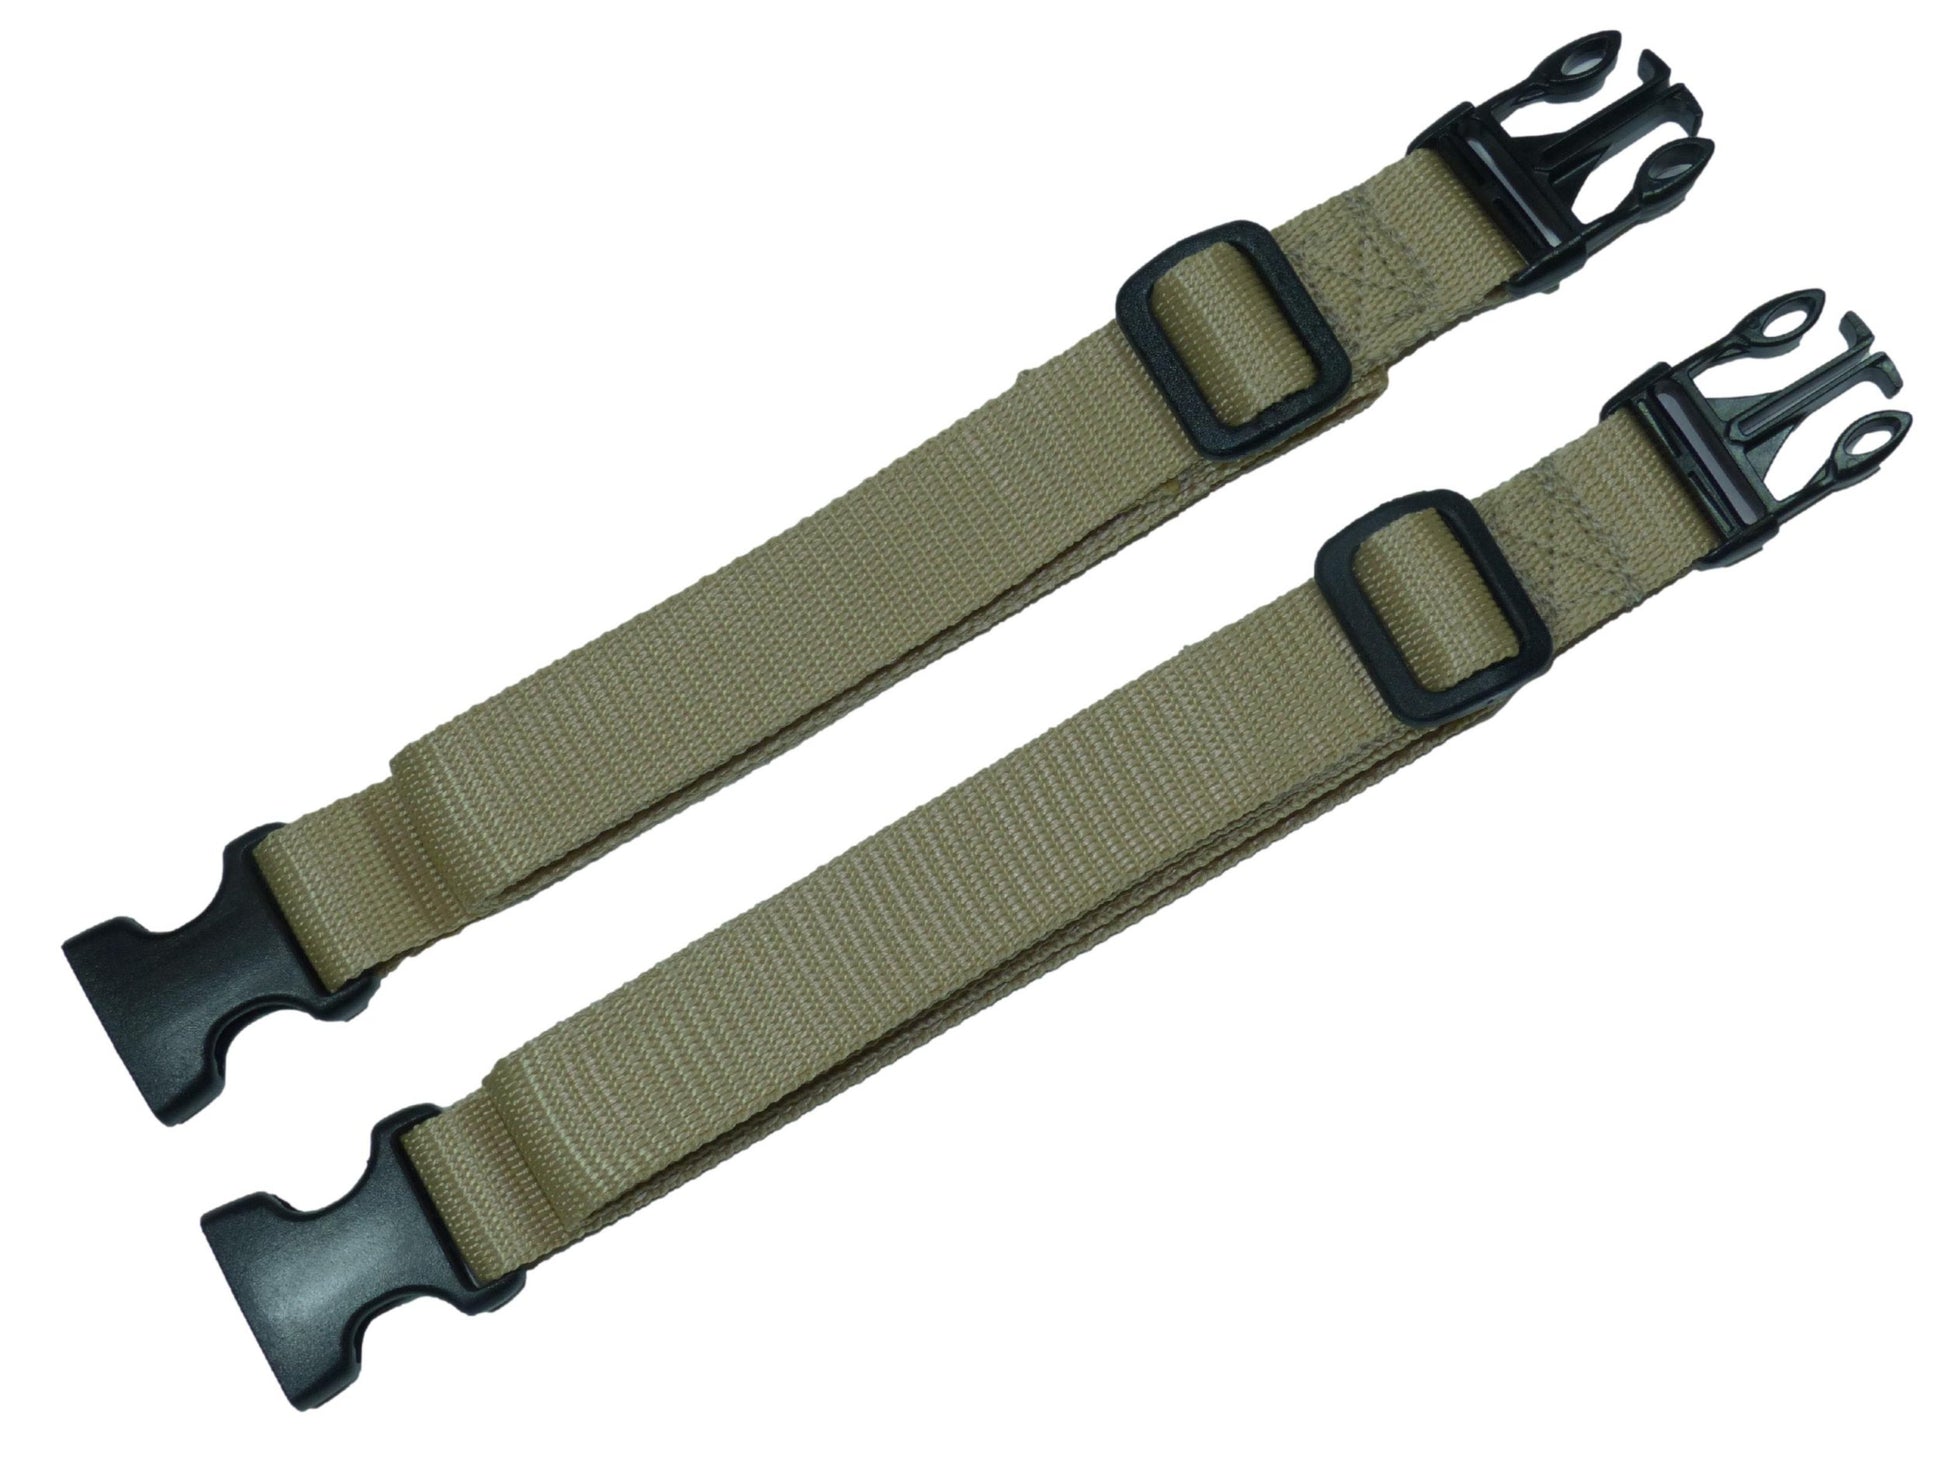 25mm Webbing Strap with Quick Release & Length-Adjusting Buckles (Pair) in beige